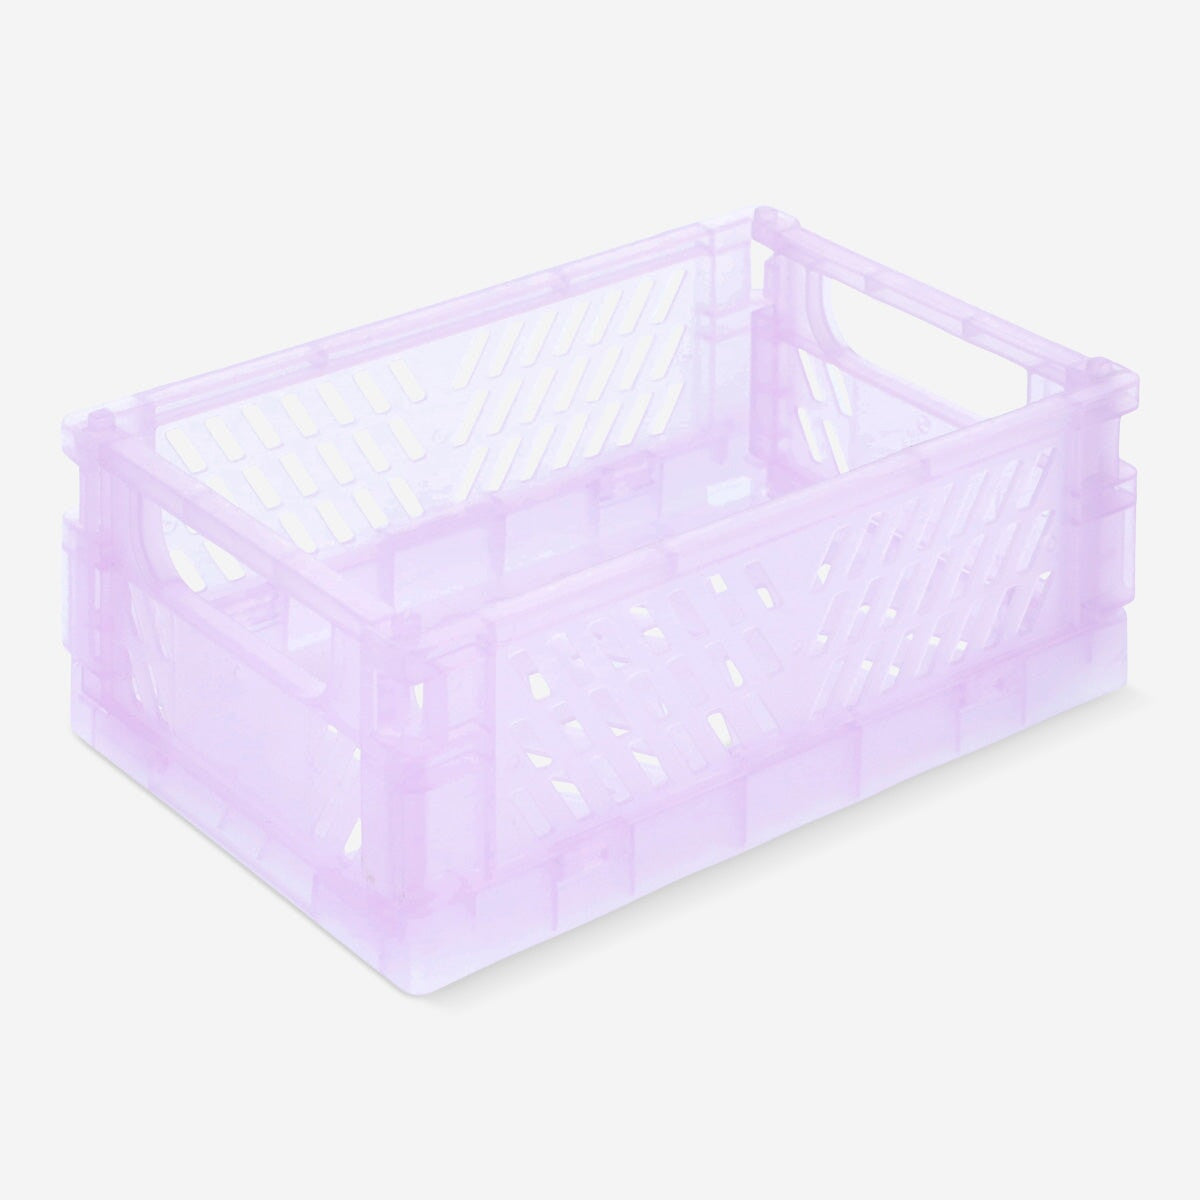 Image of Collapsible storage box. Small